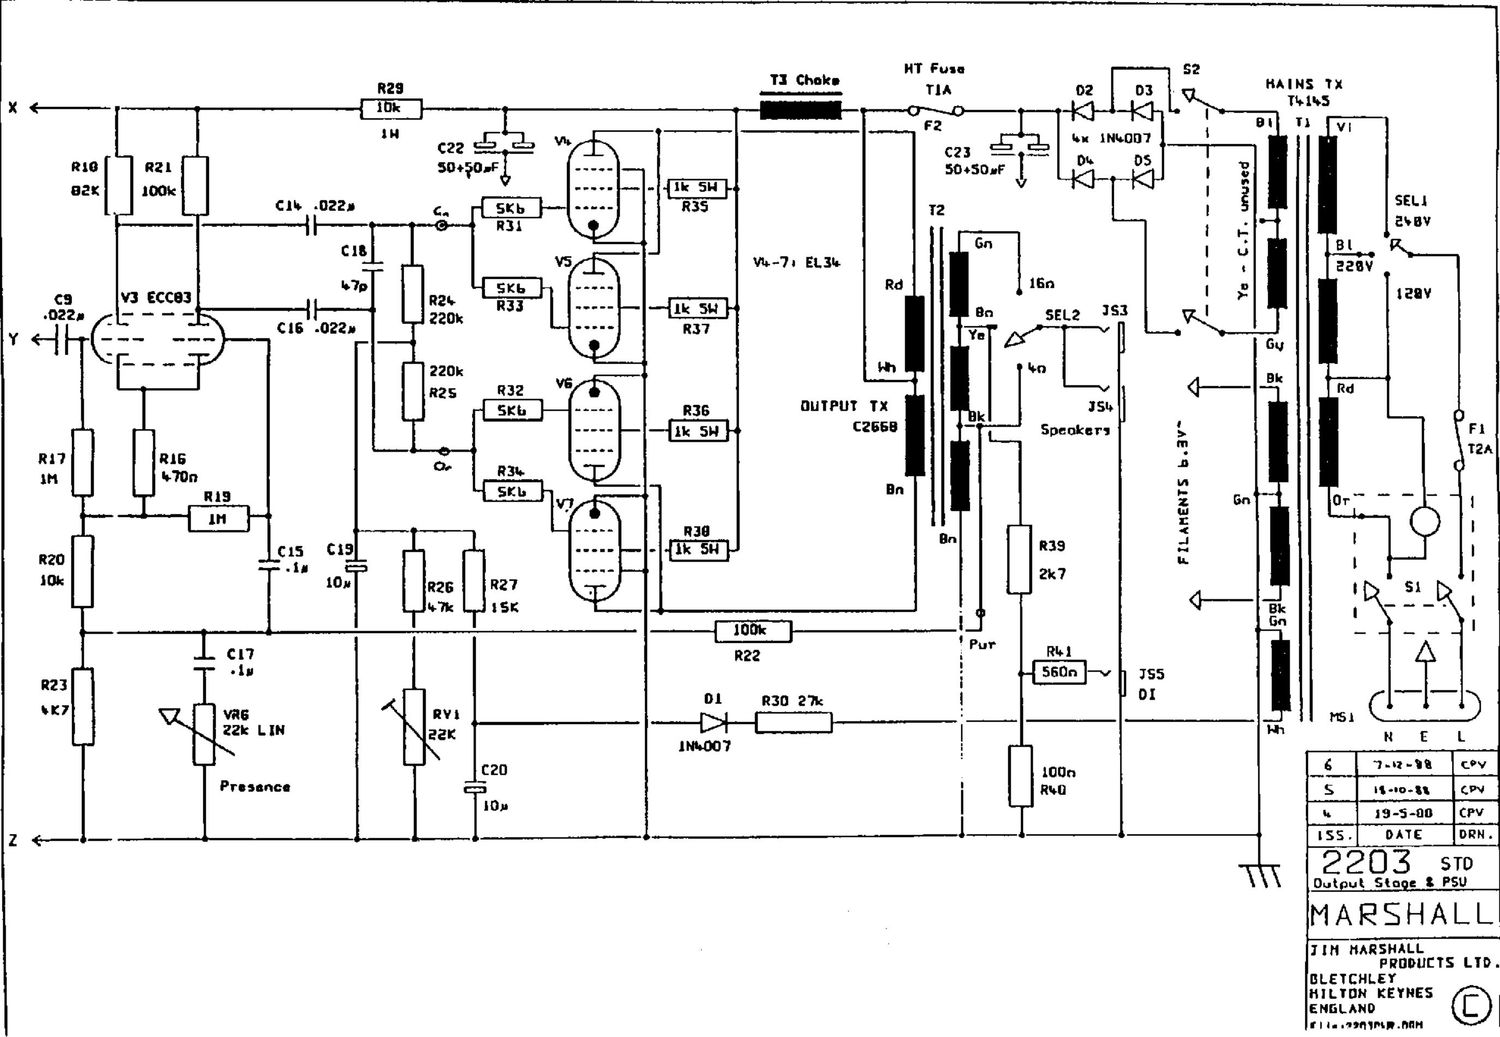 Marshall 2203 Pwrm Schematic